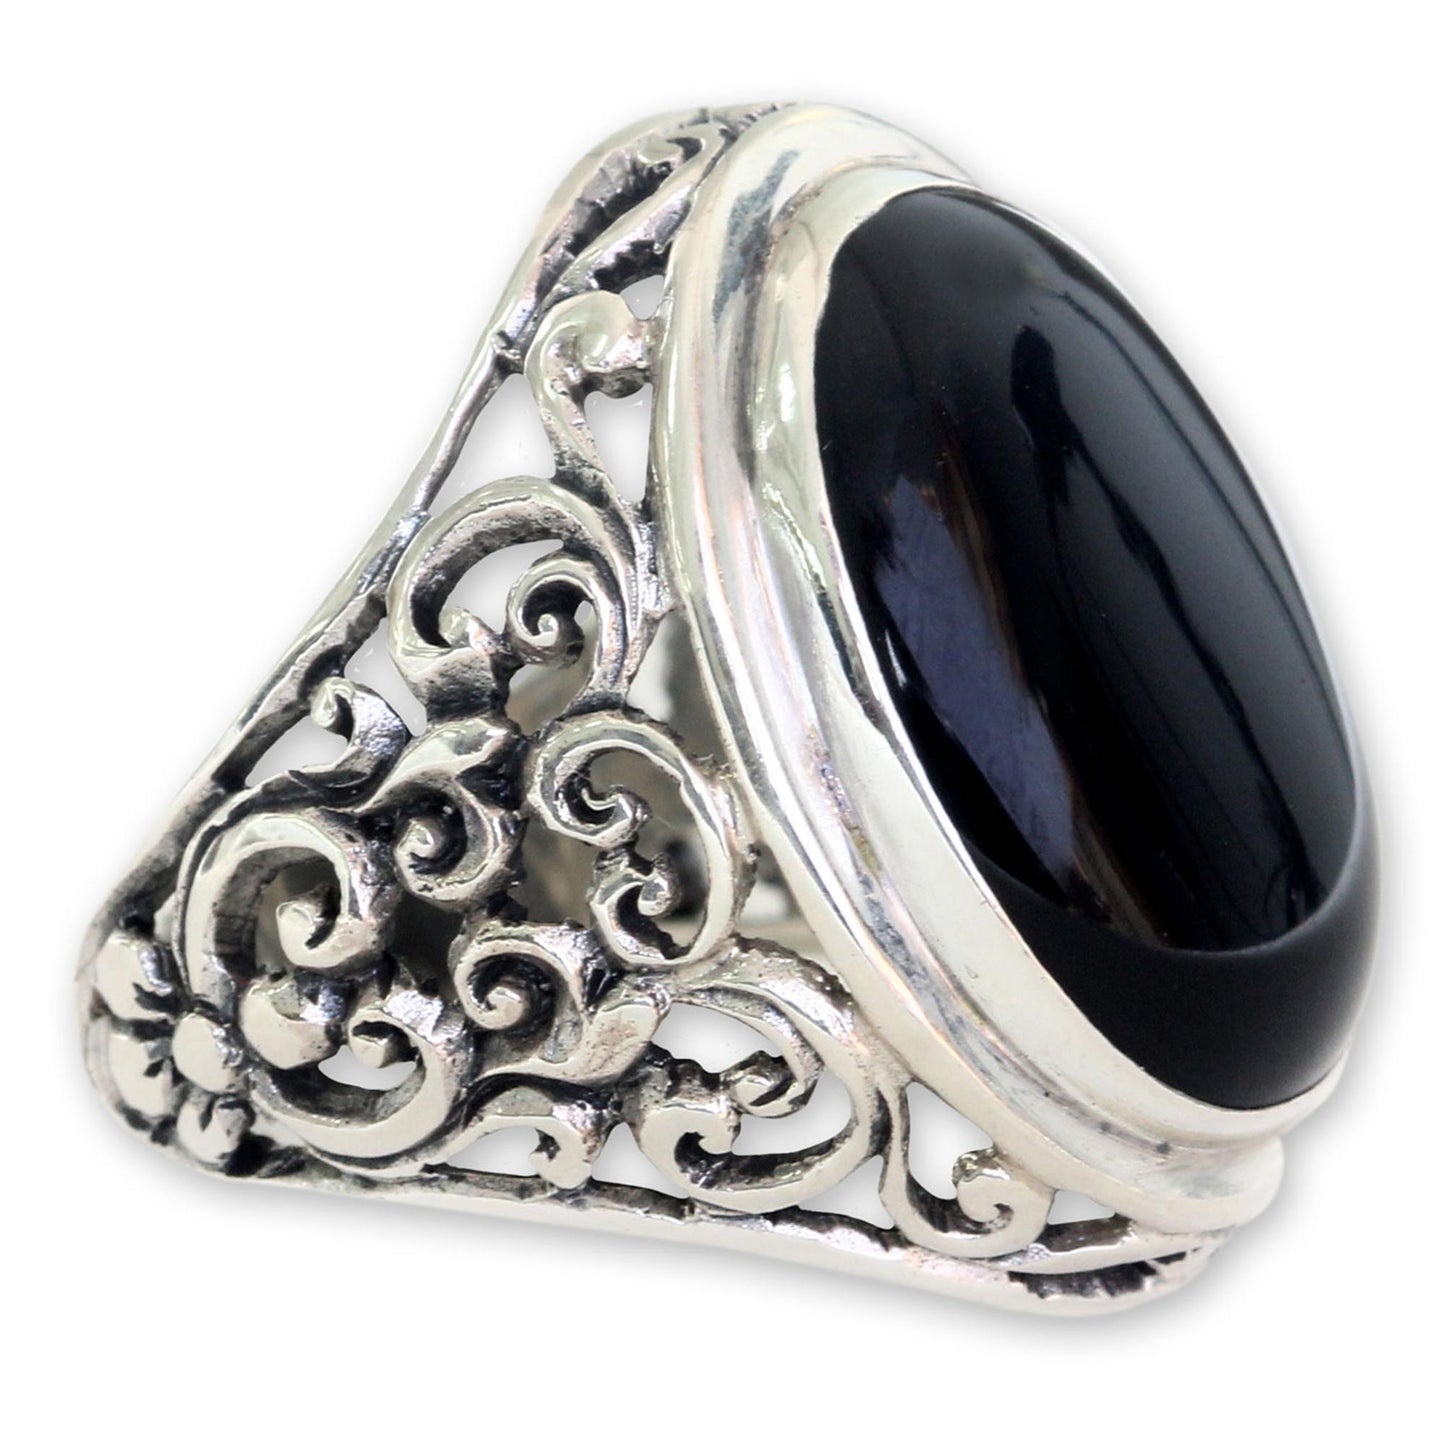 Song of the Night Men's Handmade Sterling Silver and Onyx Ring